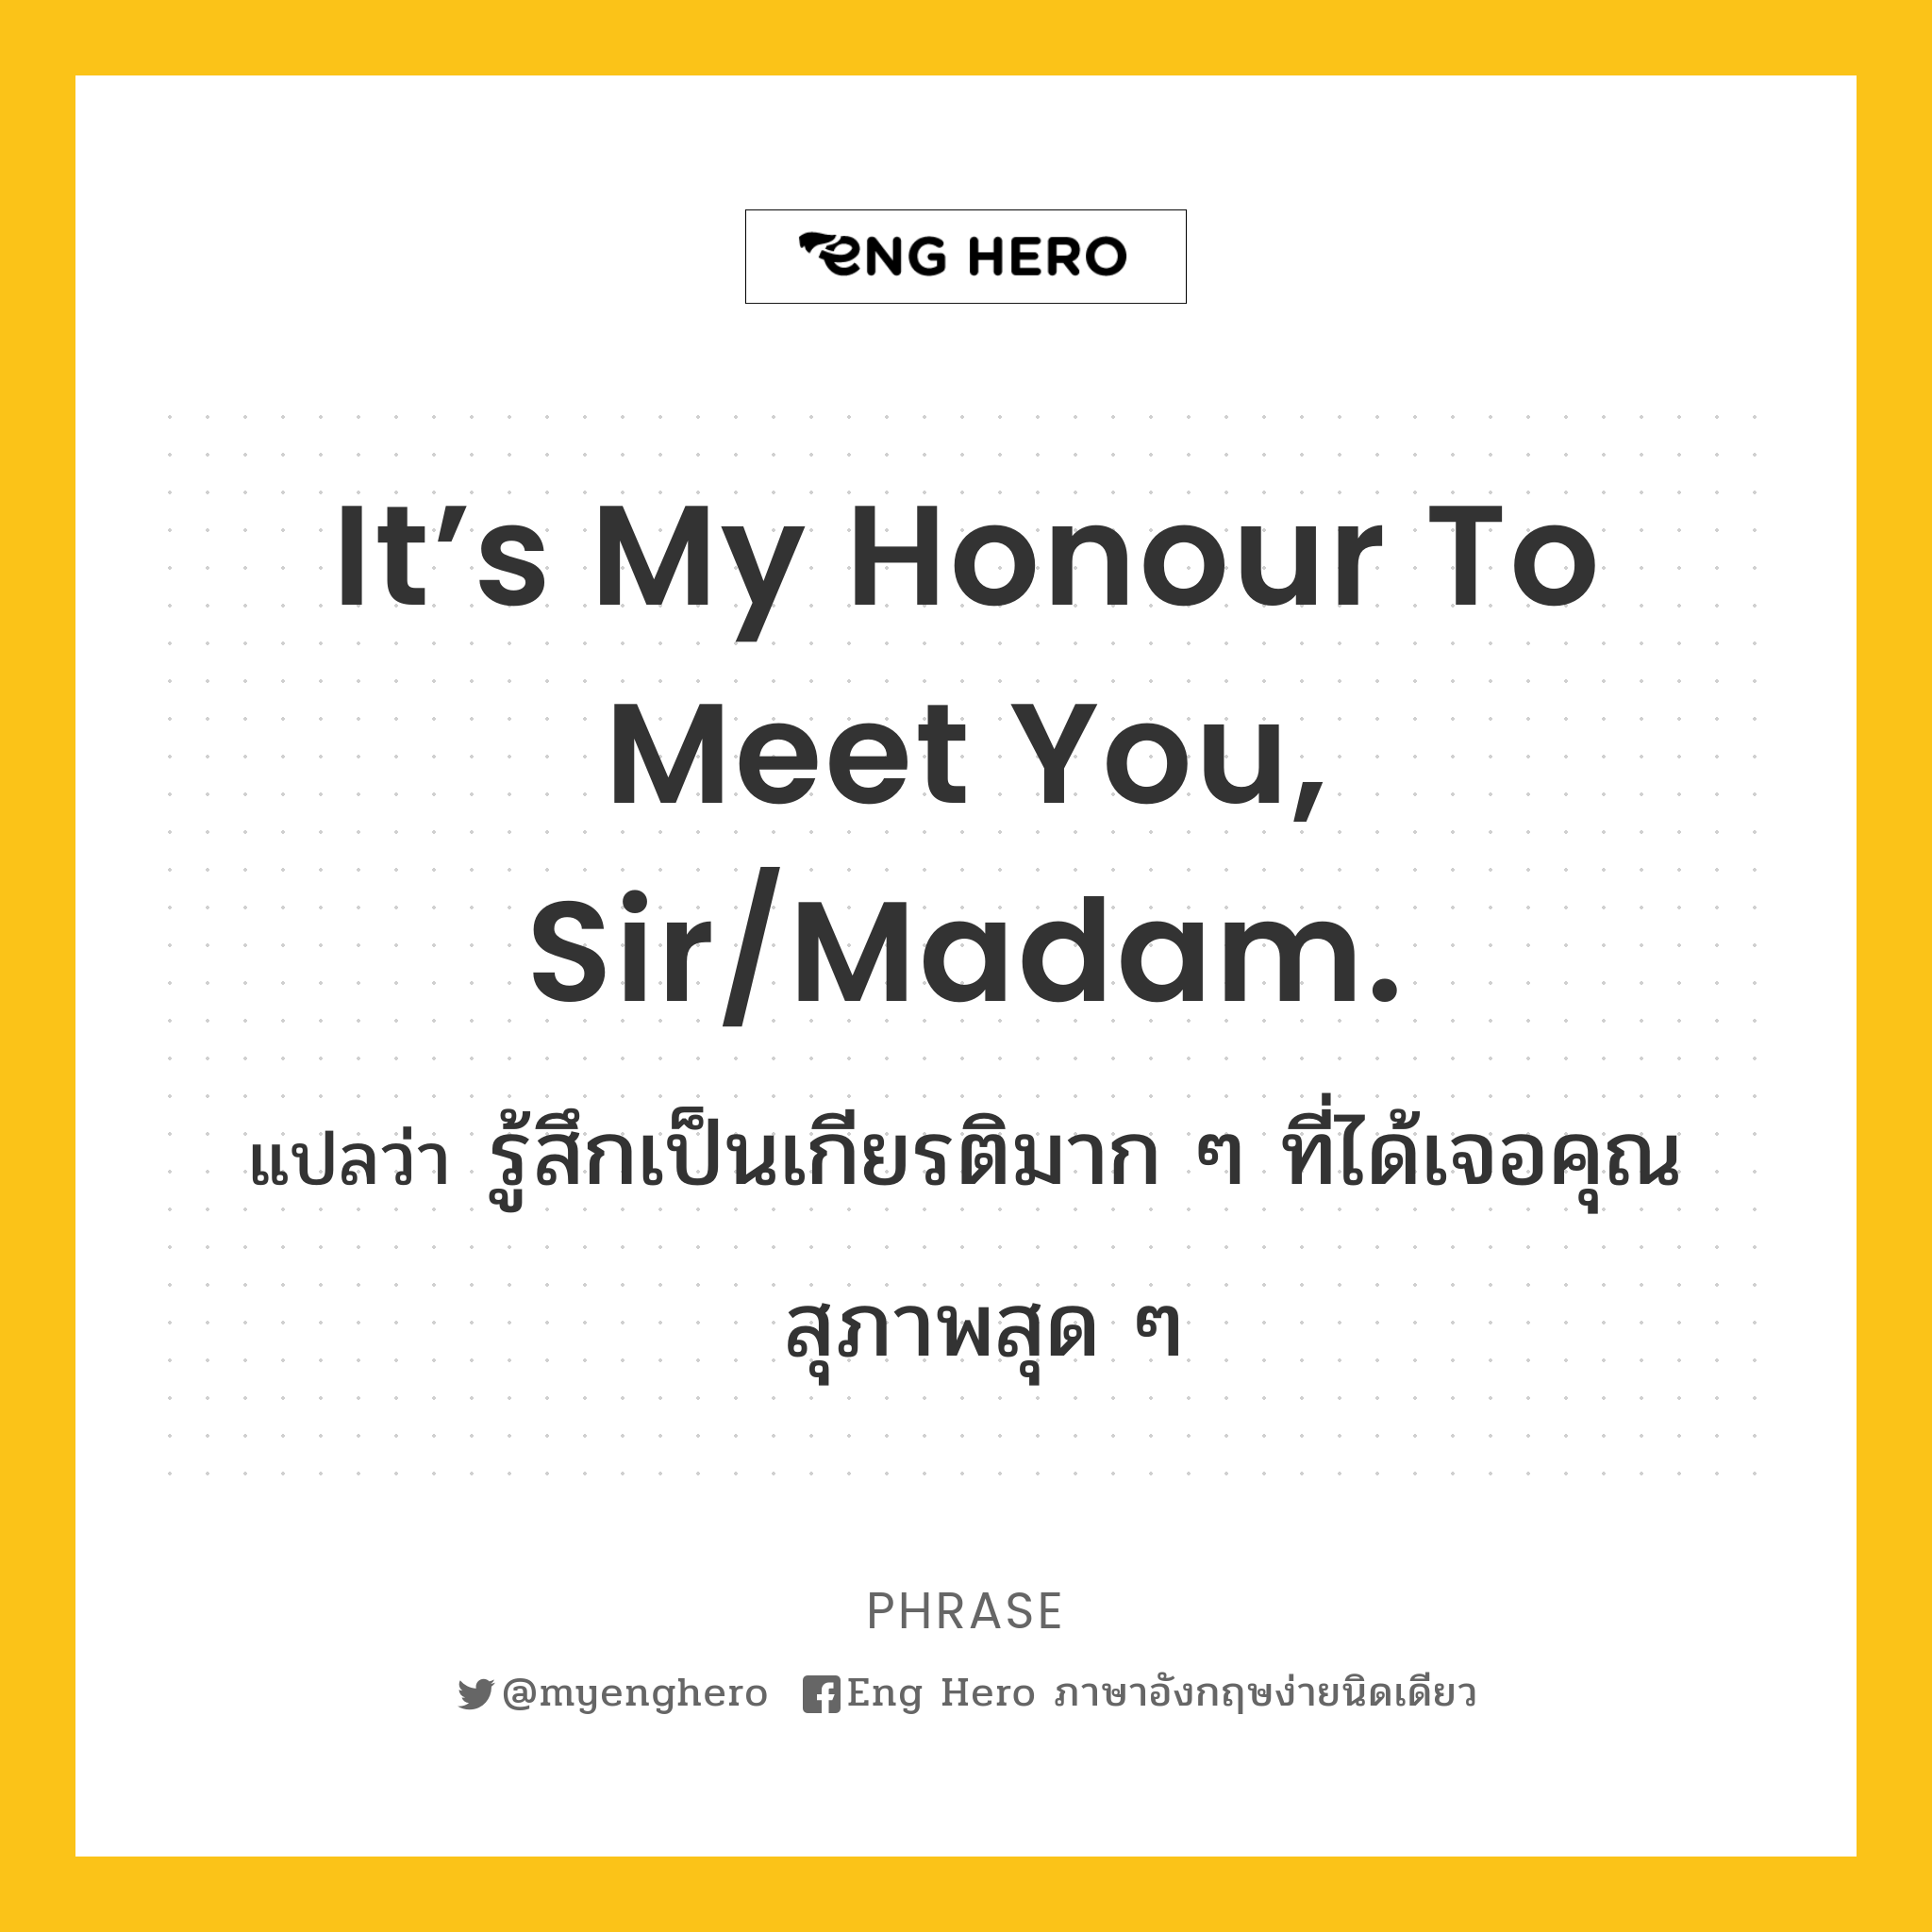 It’s my honour to meet you, sir/madam.